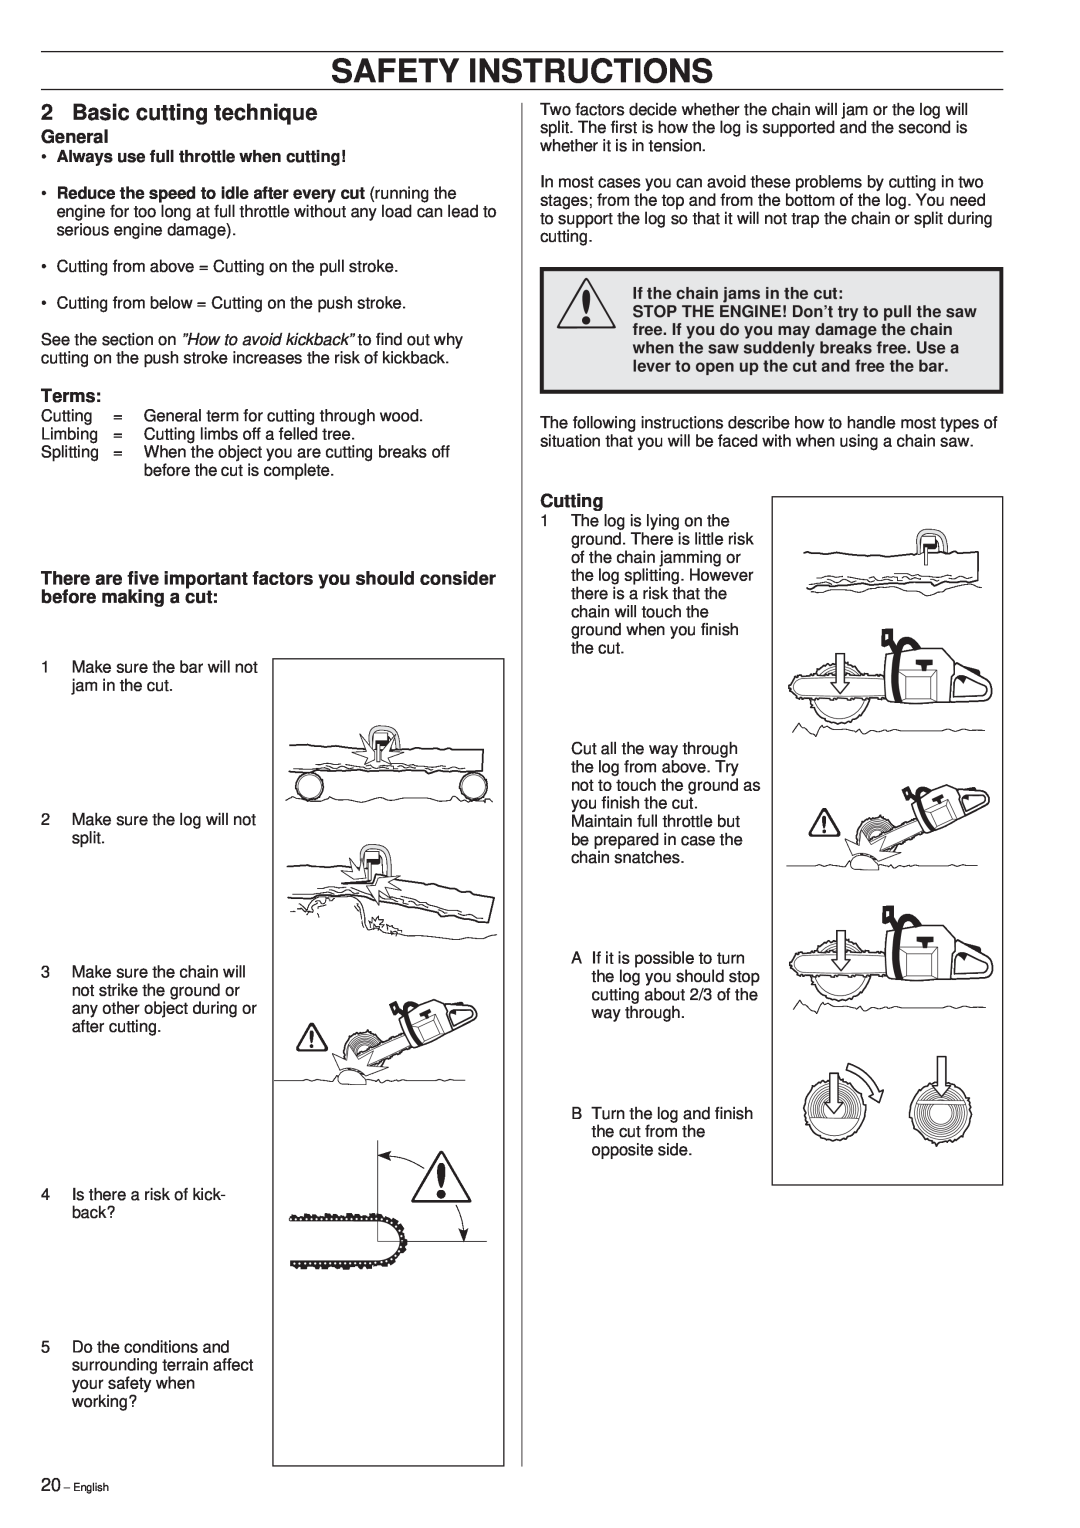 Husqvarna 40 manual Basic cutting technique, Safety Instructions, General, Terms, Cutting 